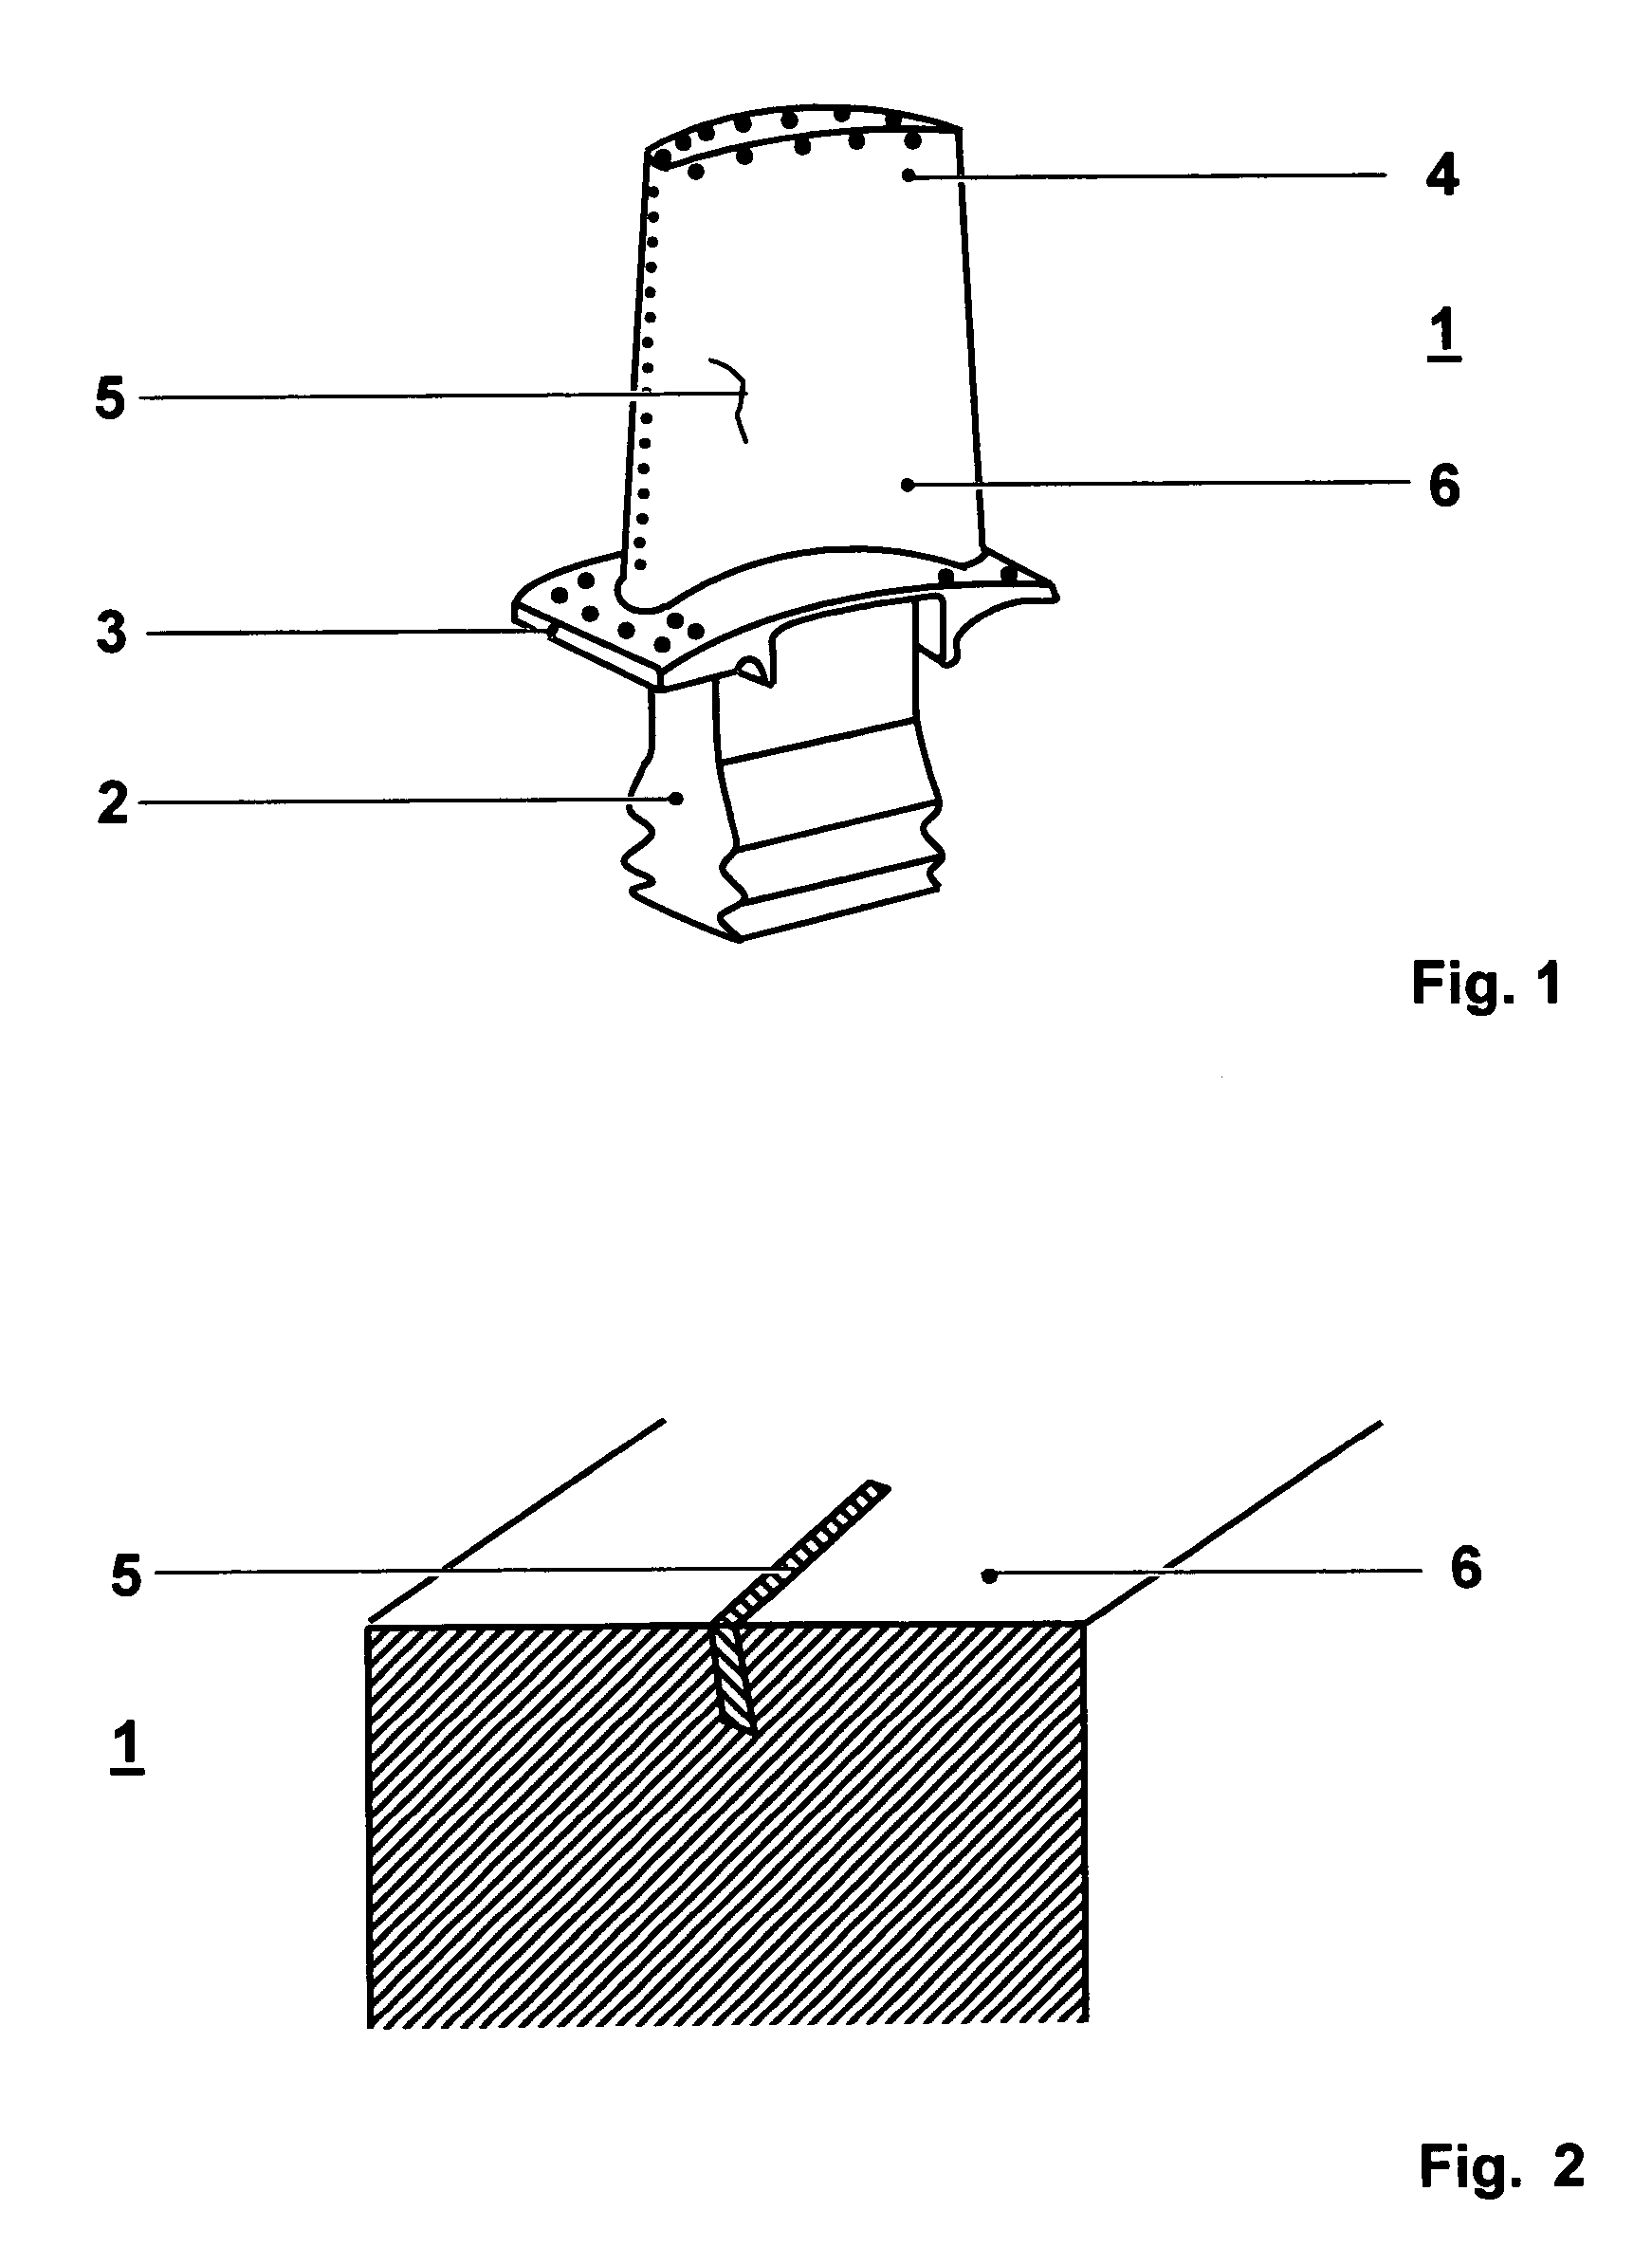 Method of removing casting defects